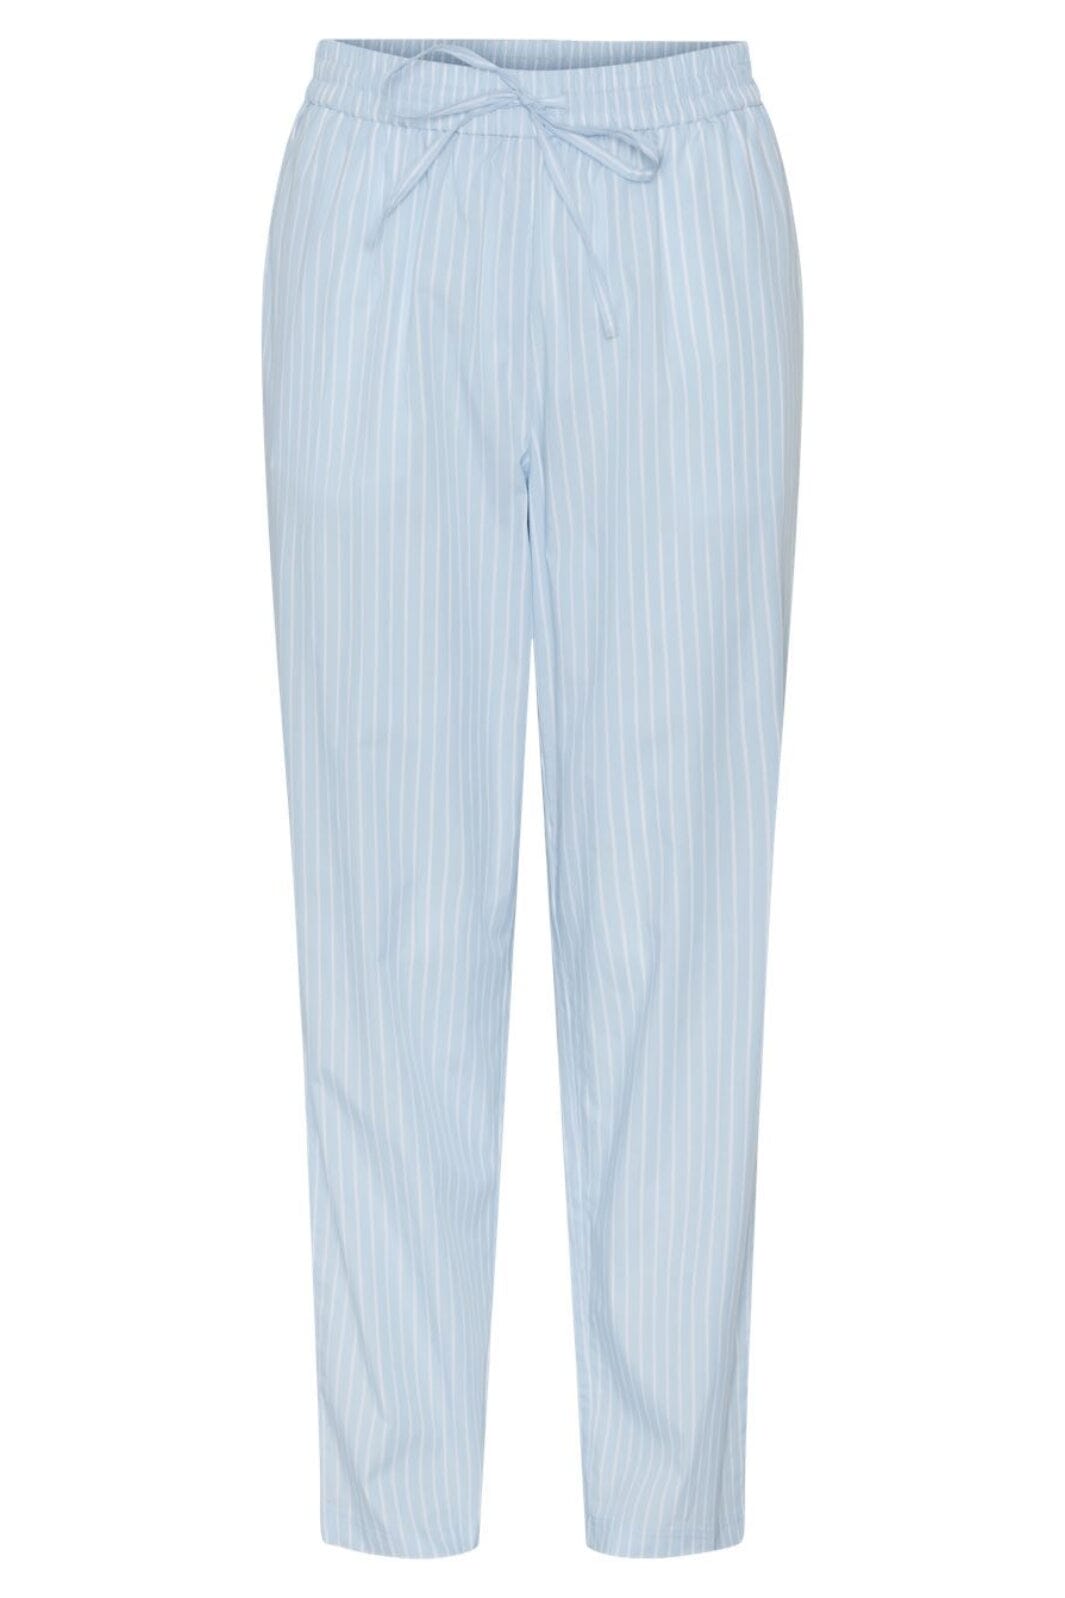 Forudbestilling - Pieces - Pcpenny Ankle Pants Pwp Mm - 4515442 Airy Blue Bright White Bukser 